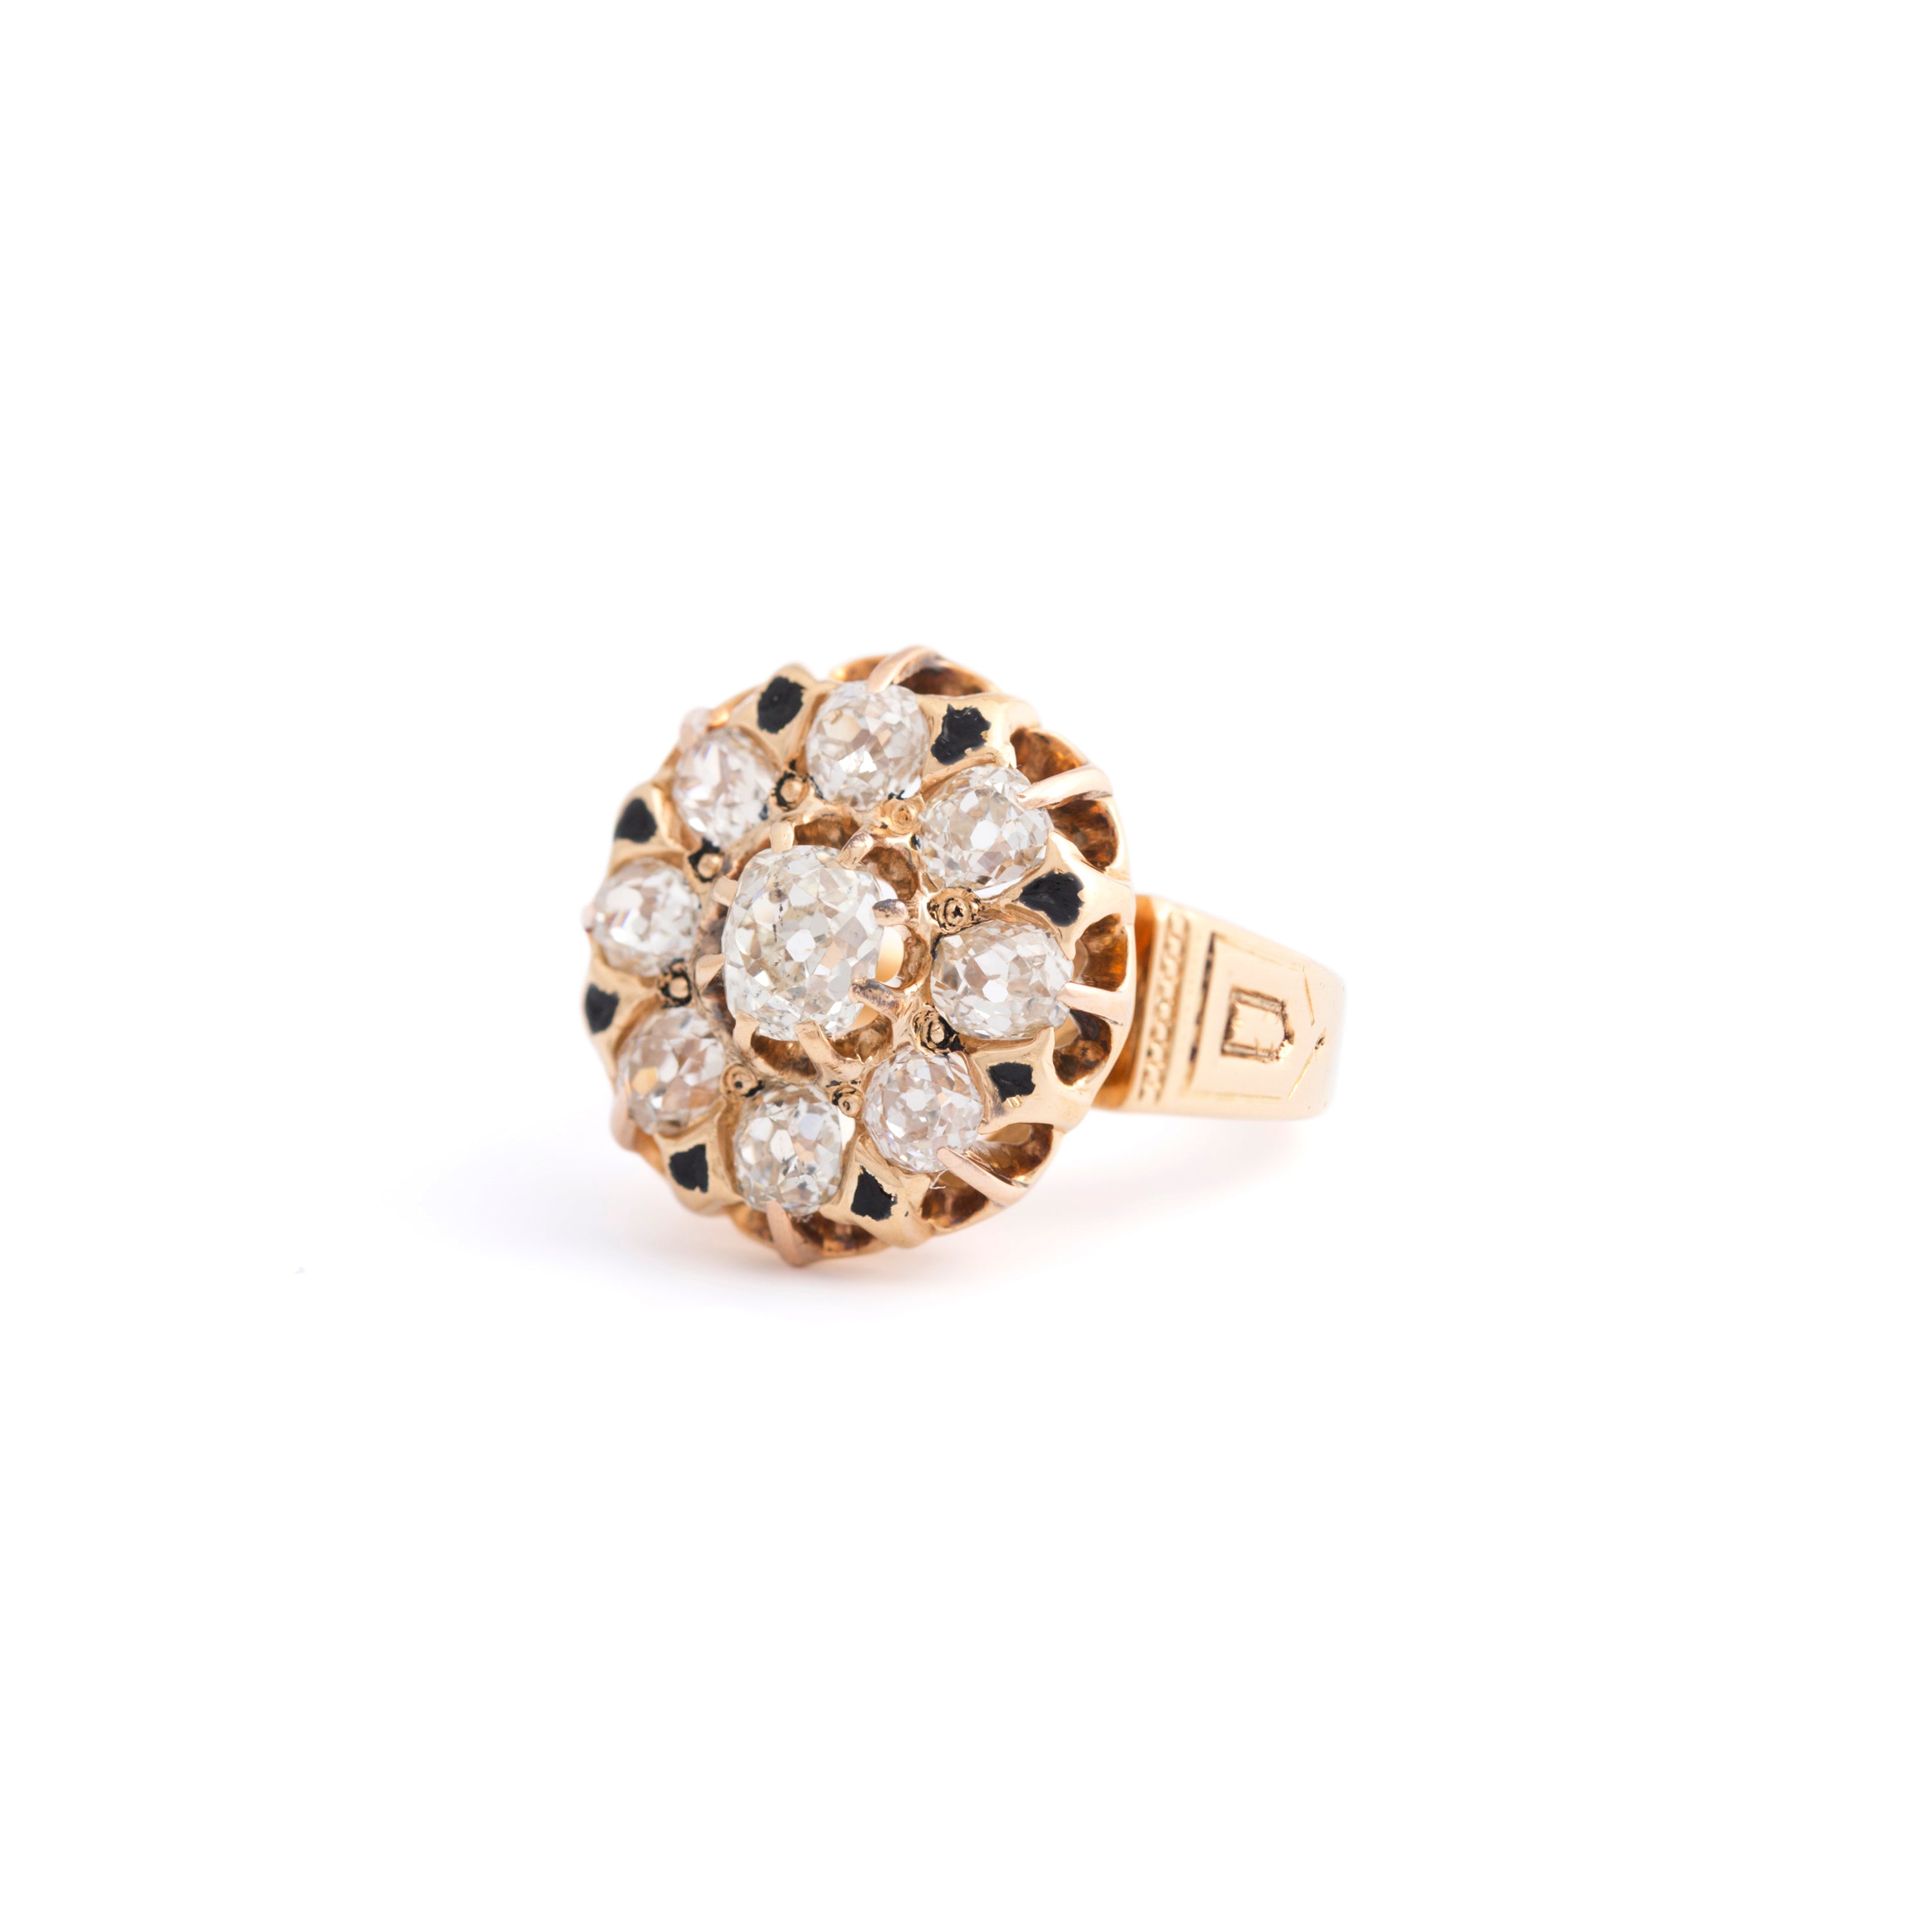 Victorian Old Mine Cut Diamond Cluster Ring with Enamel and 18k Yellow Gold